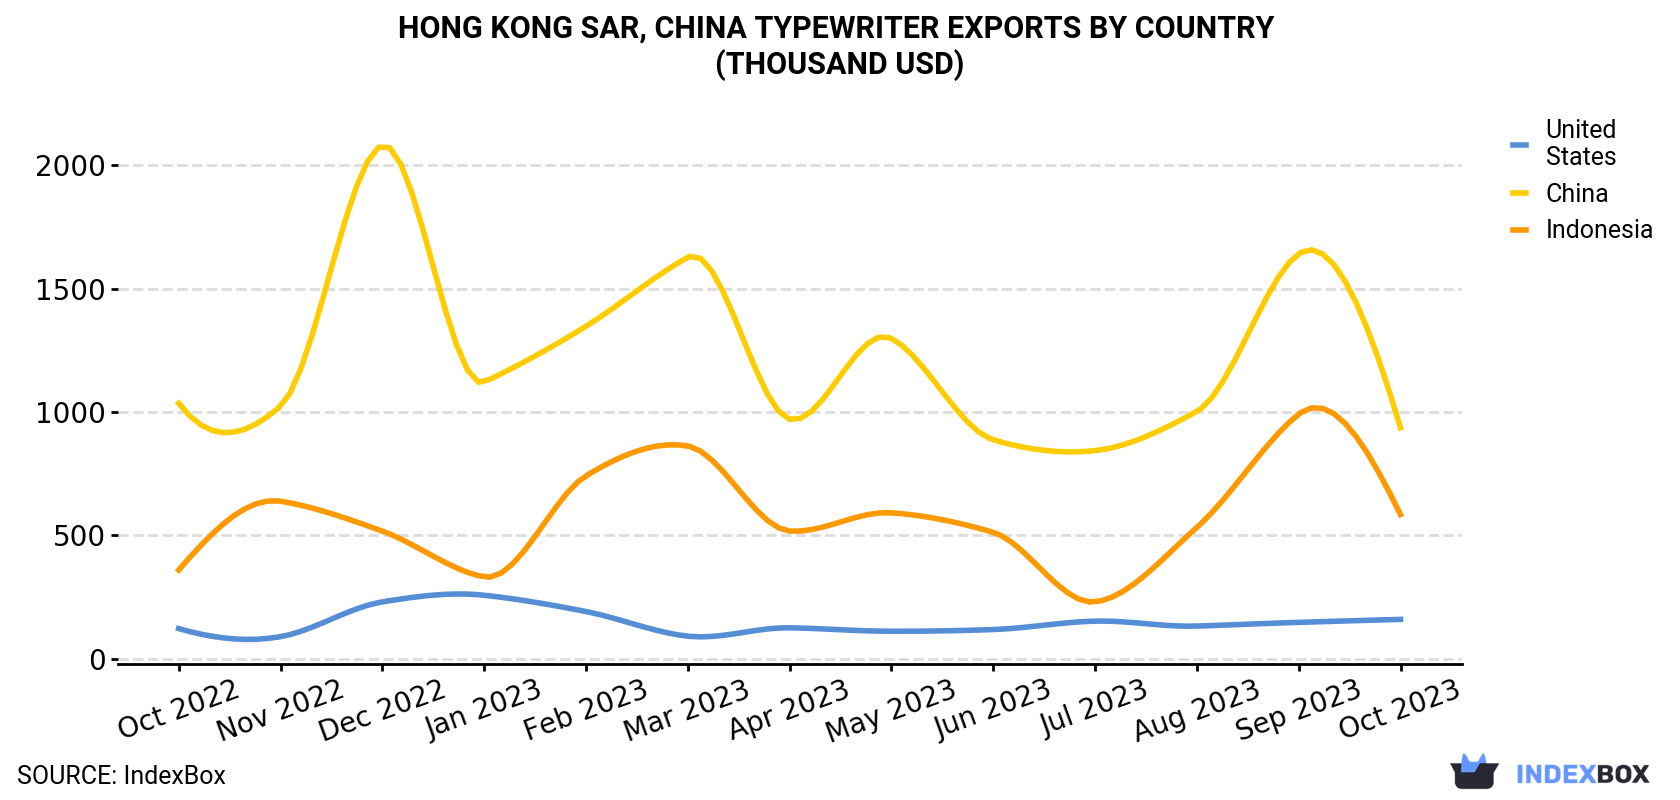 Hong Kong Typewriter Exports By Country (Thousand USD)